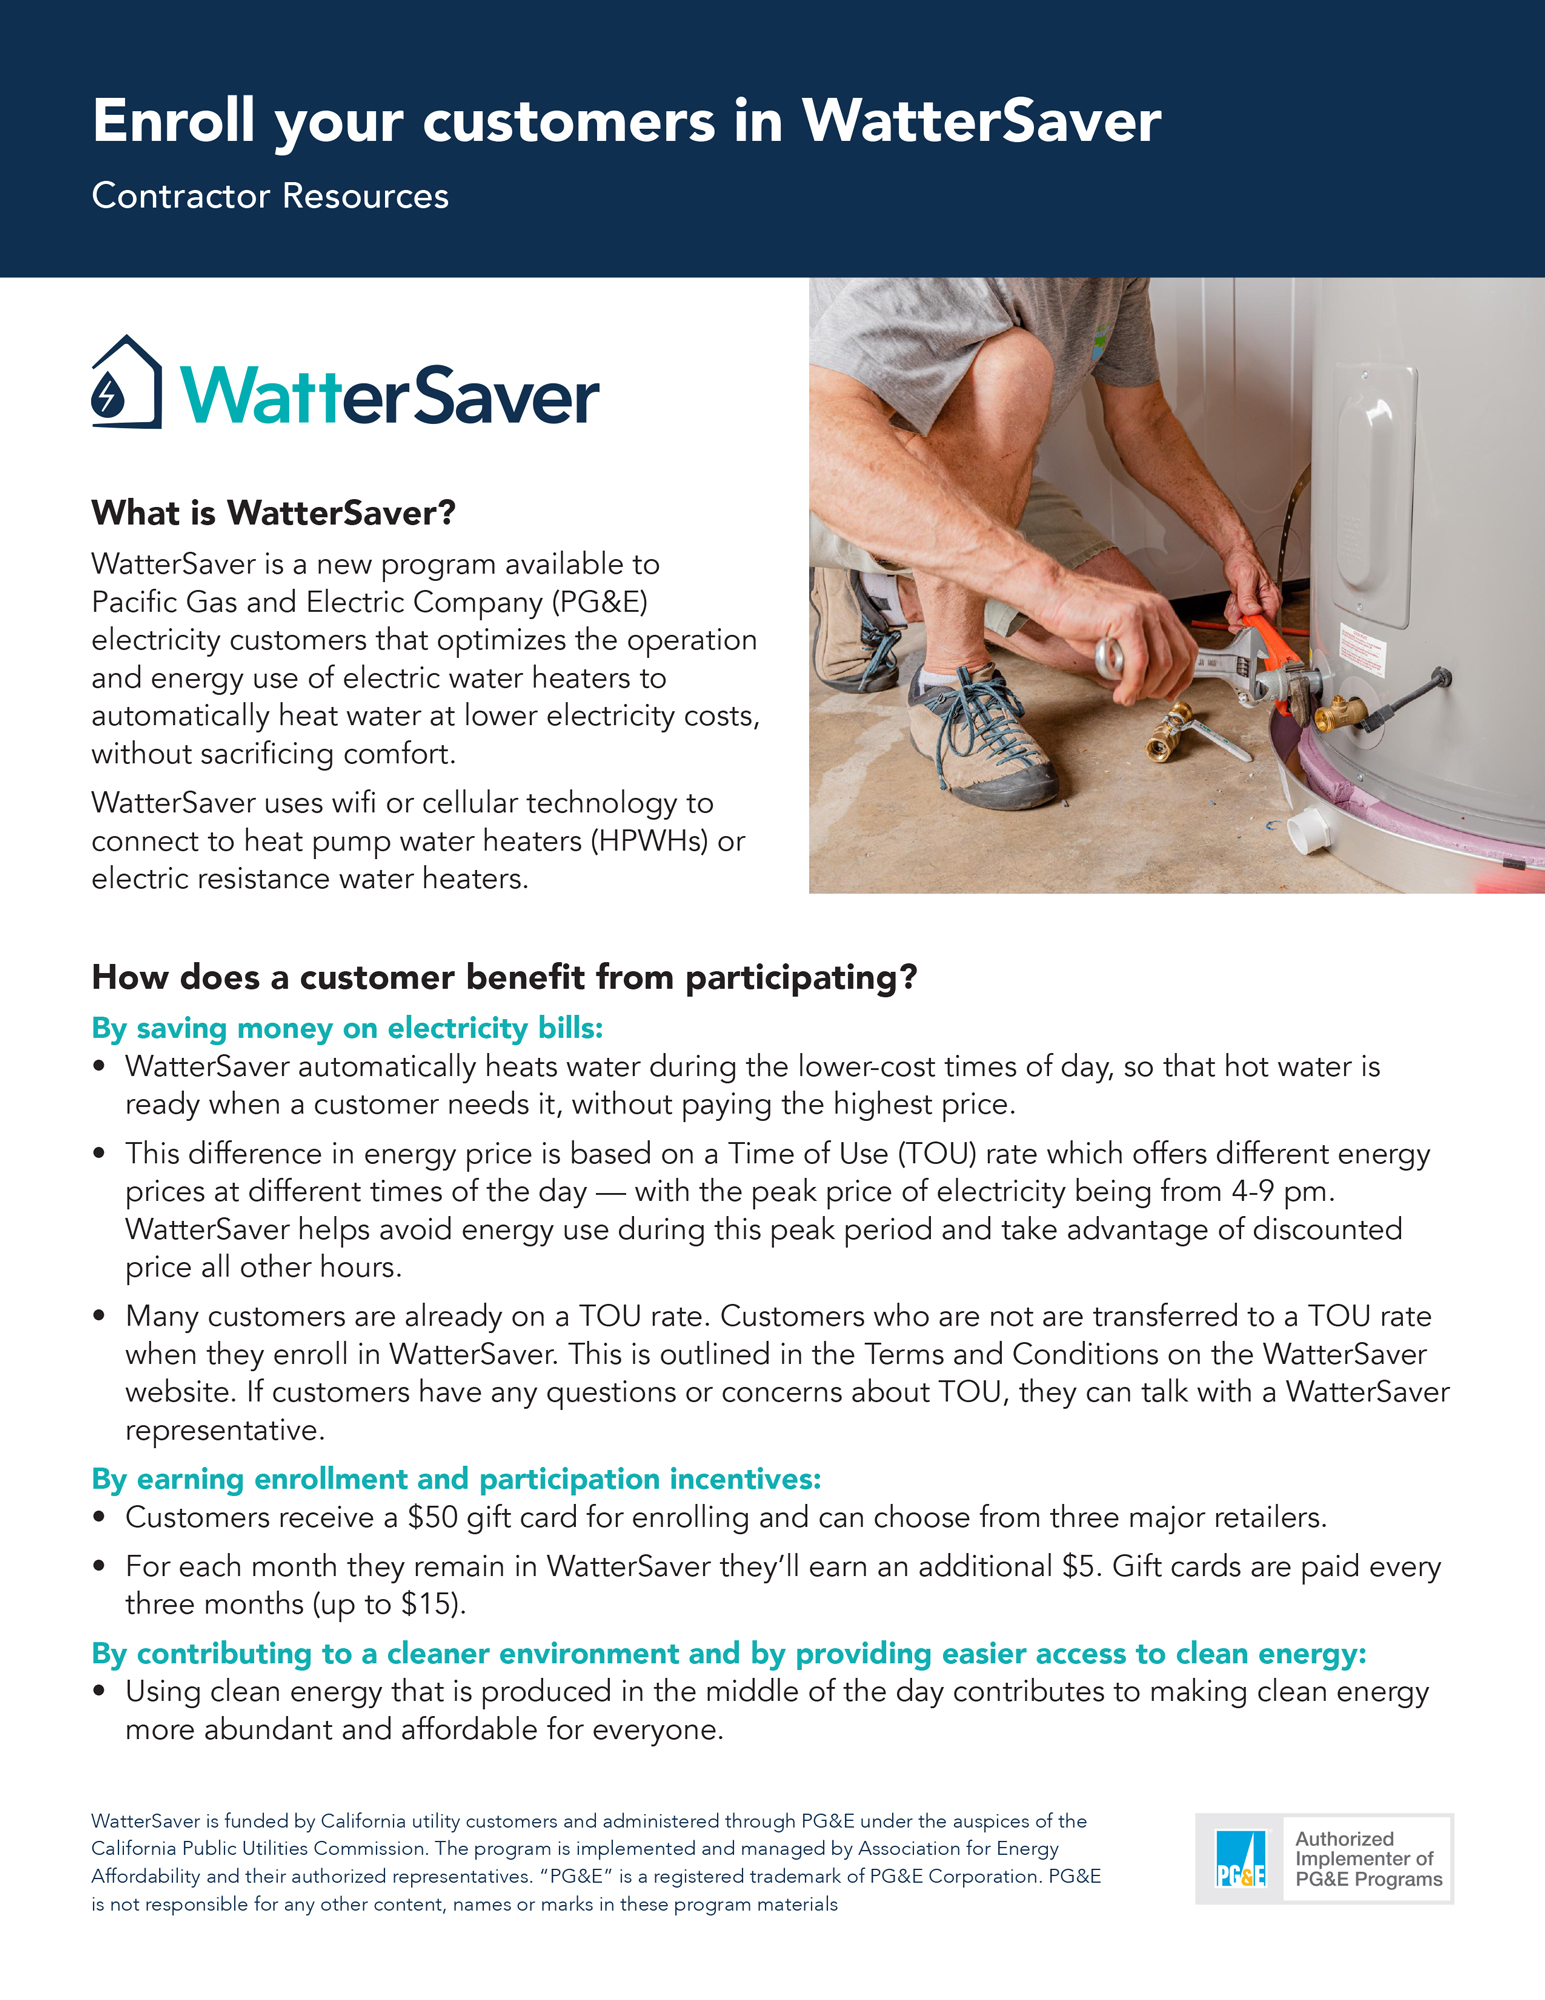 Contractor resources for installing water heaters with WatterSaver.